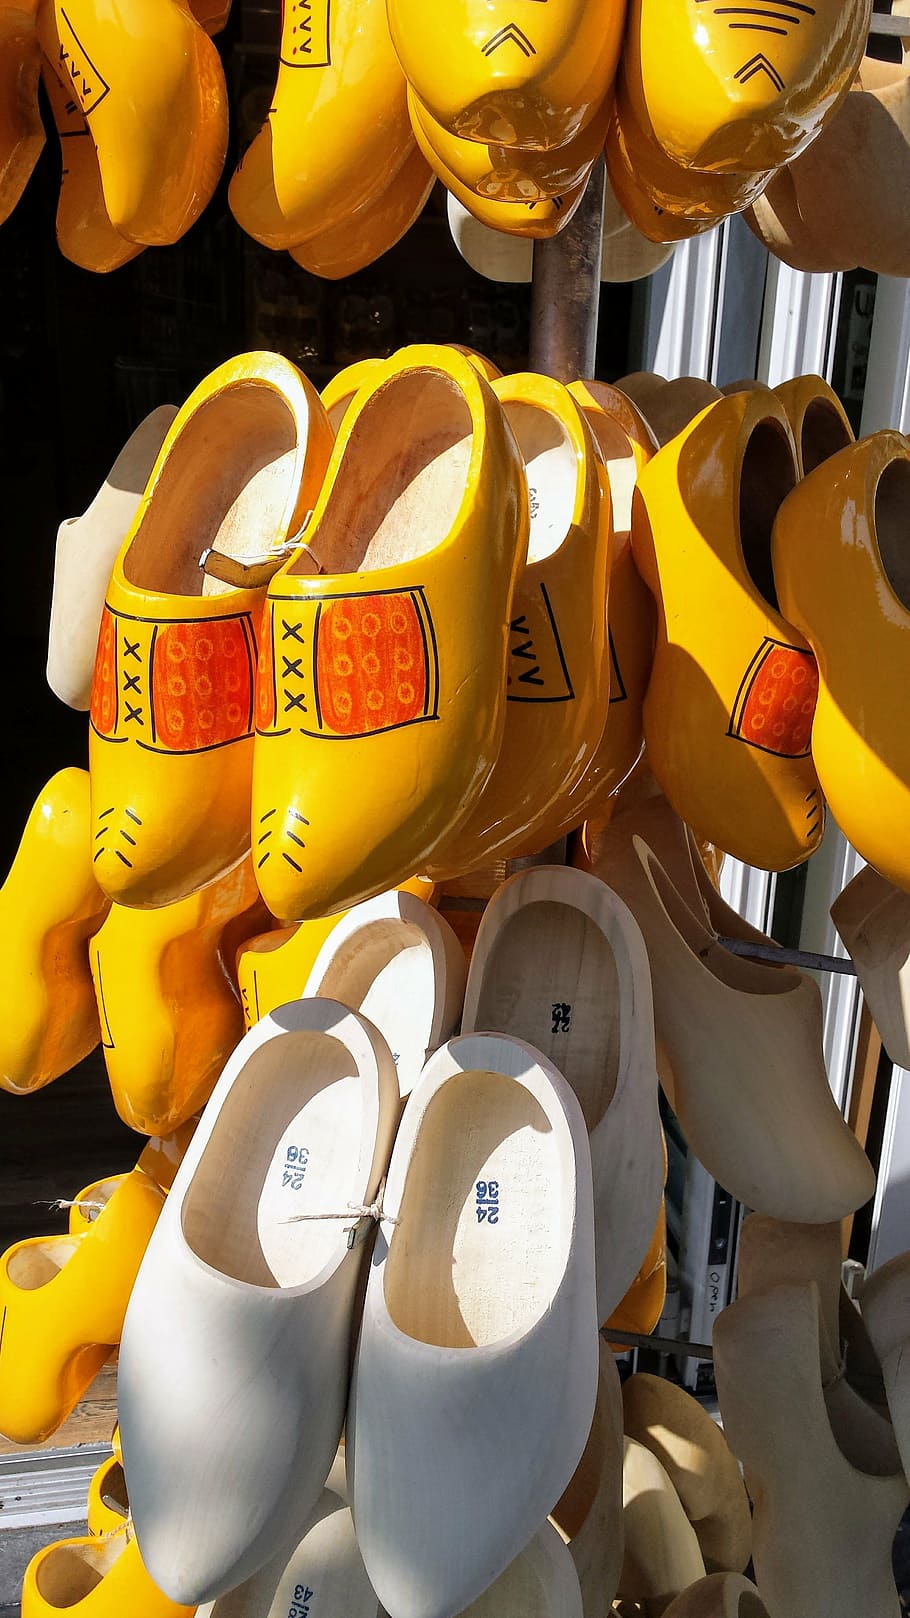 clogs, netherlands, shoe, wood, bergen op zoom, large group of objects, retail, yellow, for sale, abundance